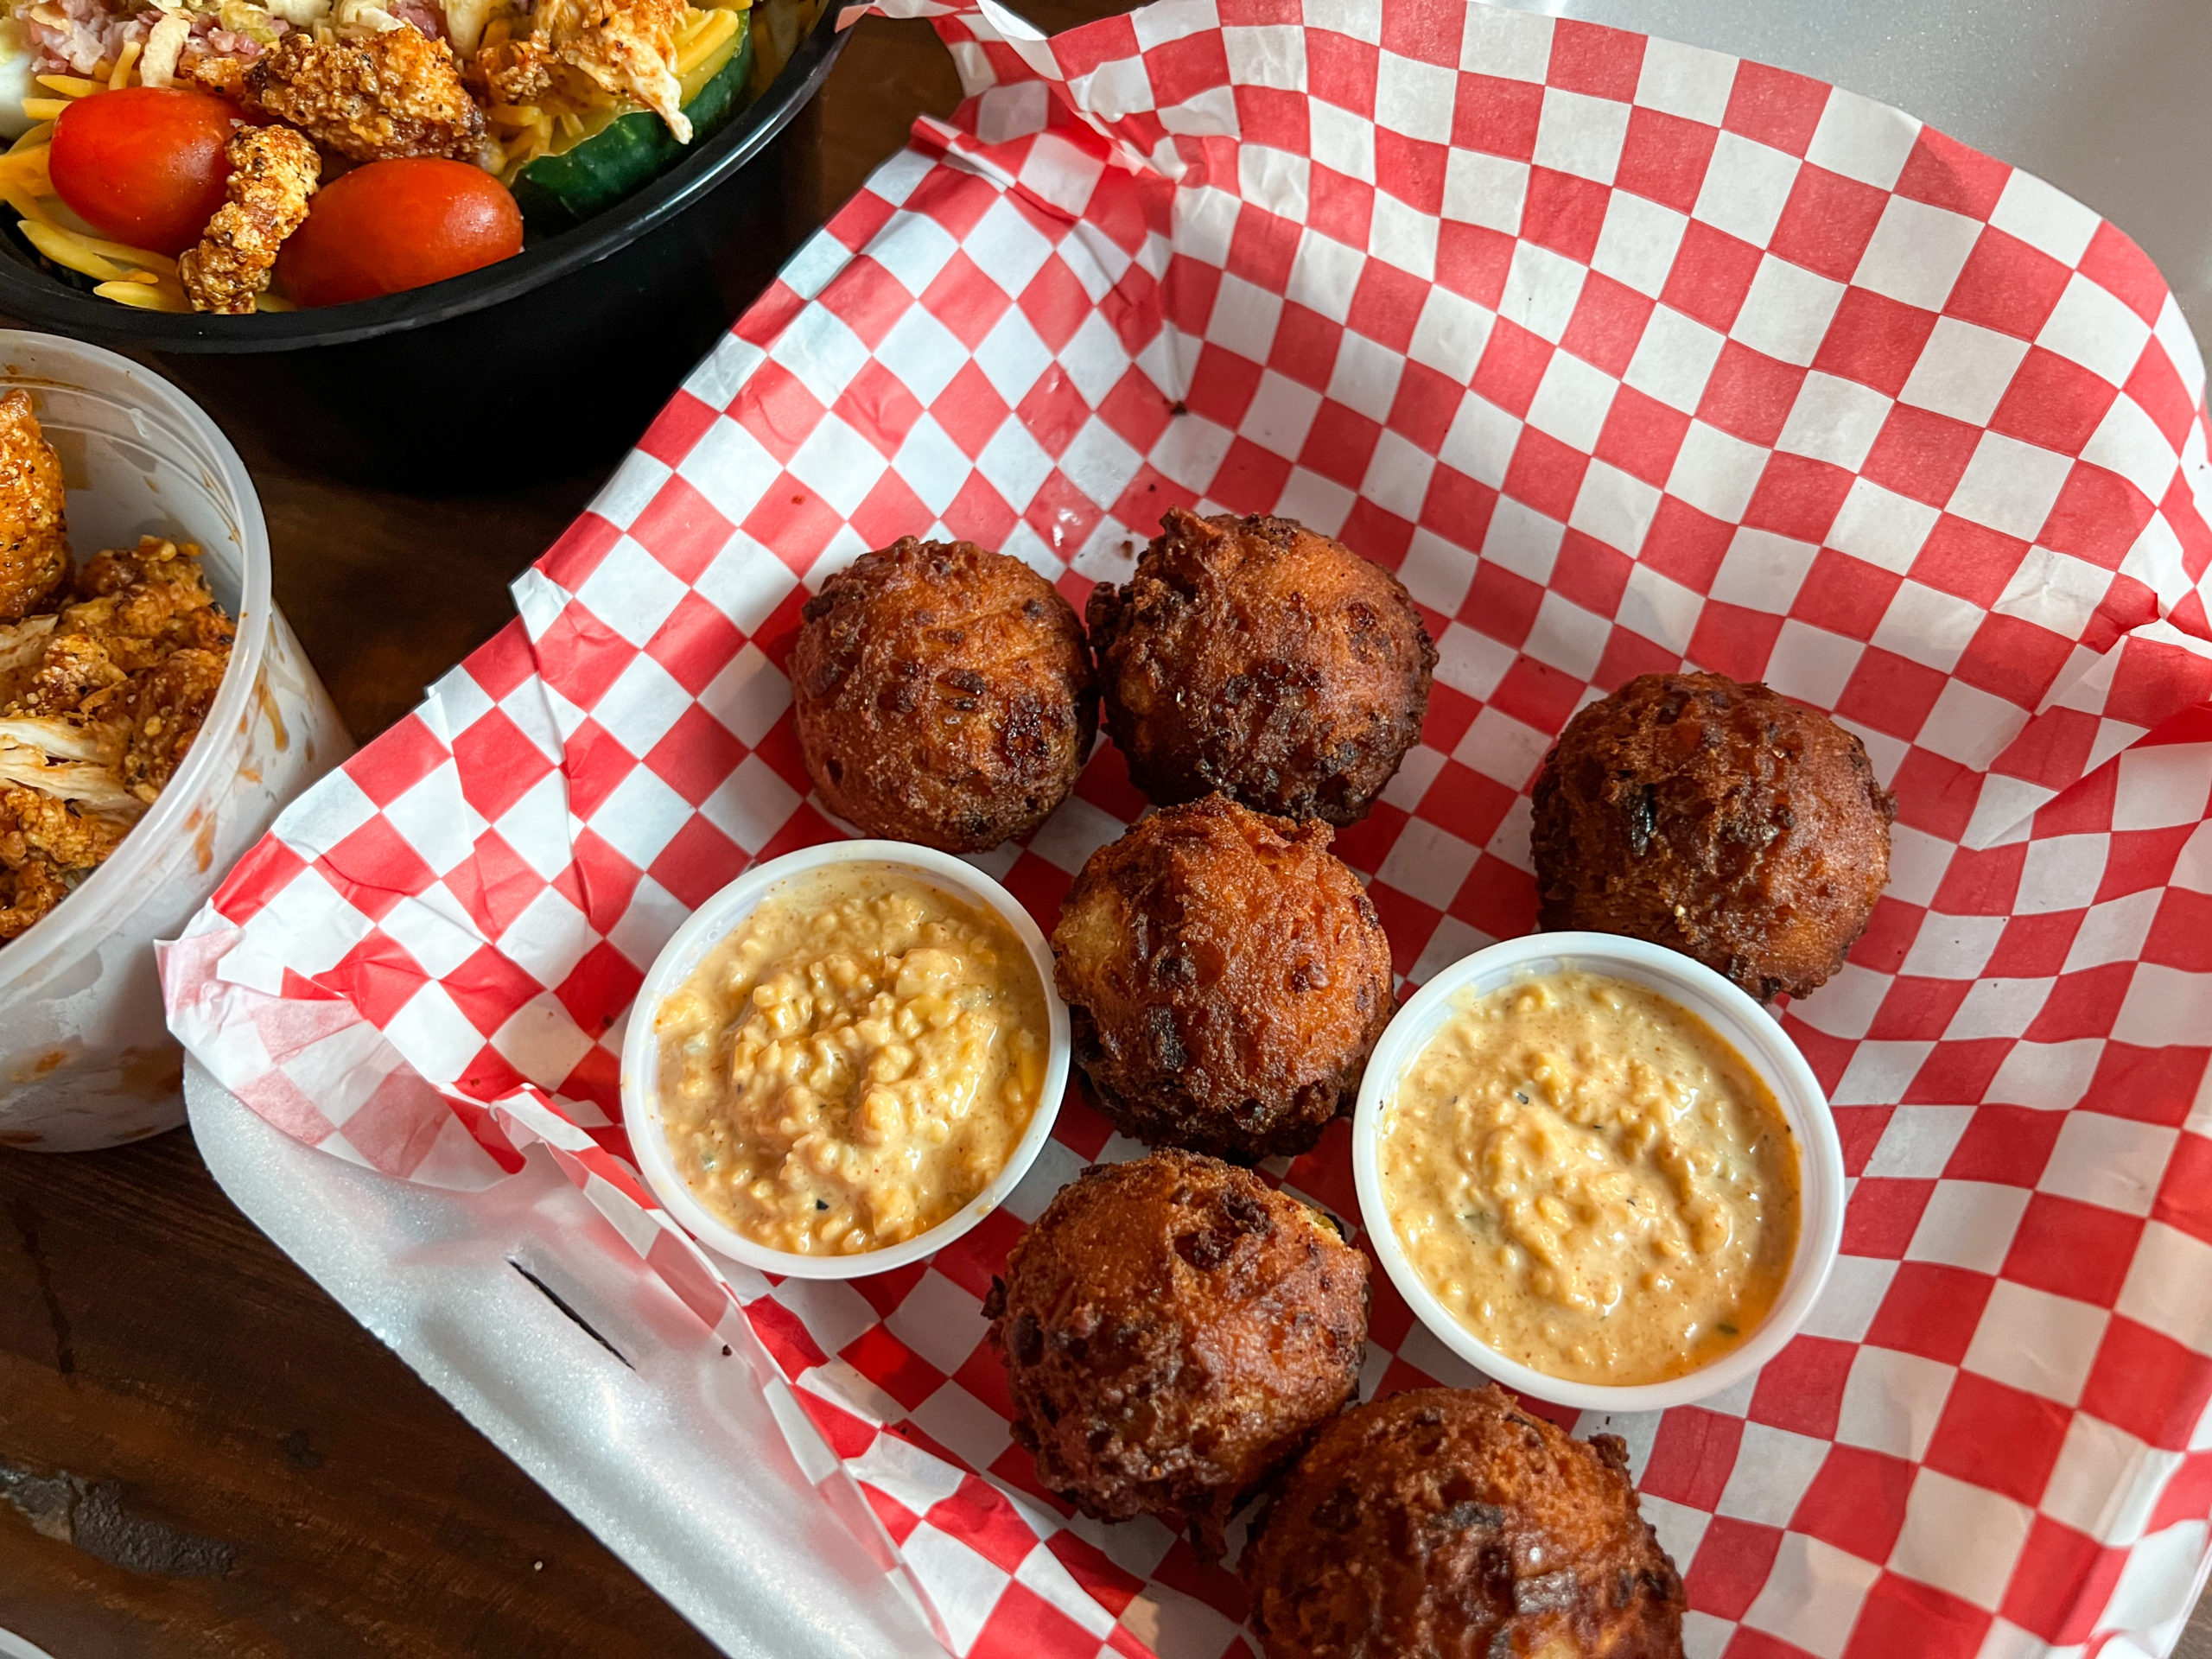 Hush Puppies served with Pimento Cheese